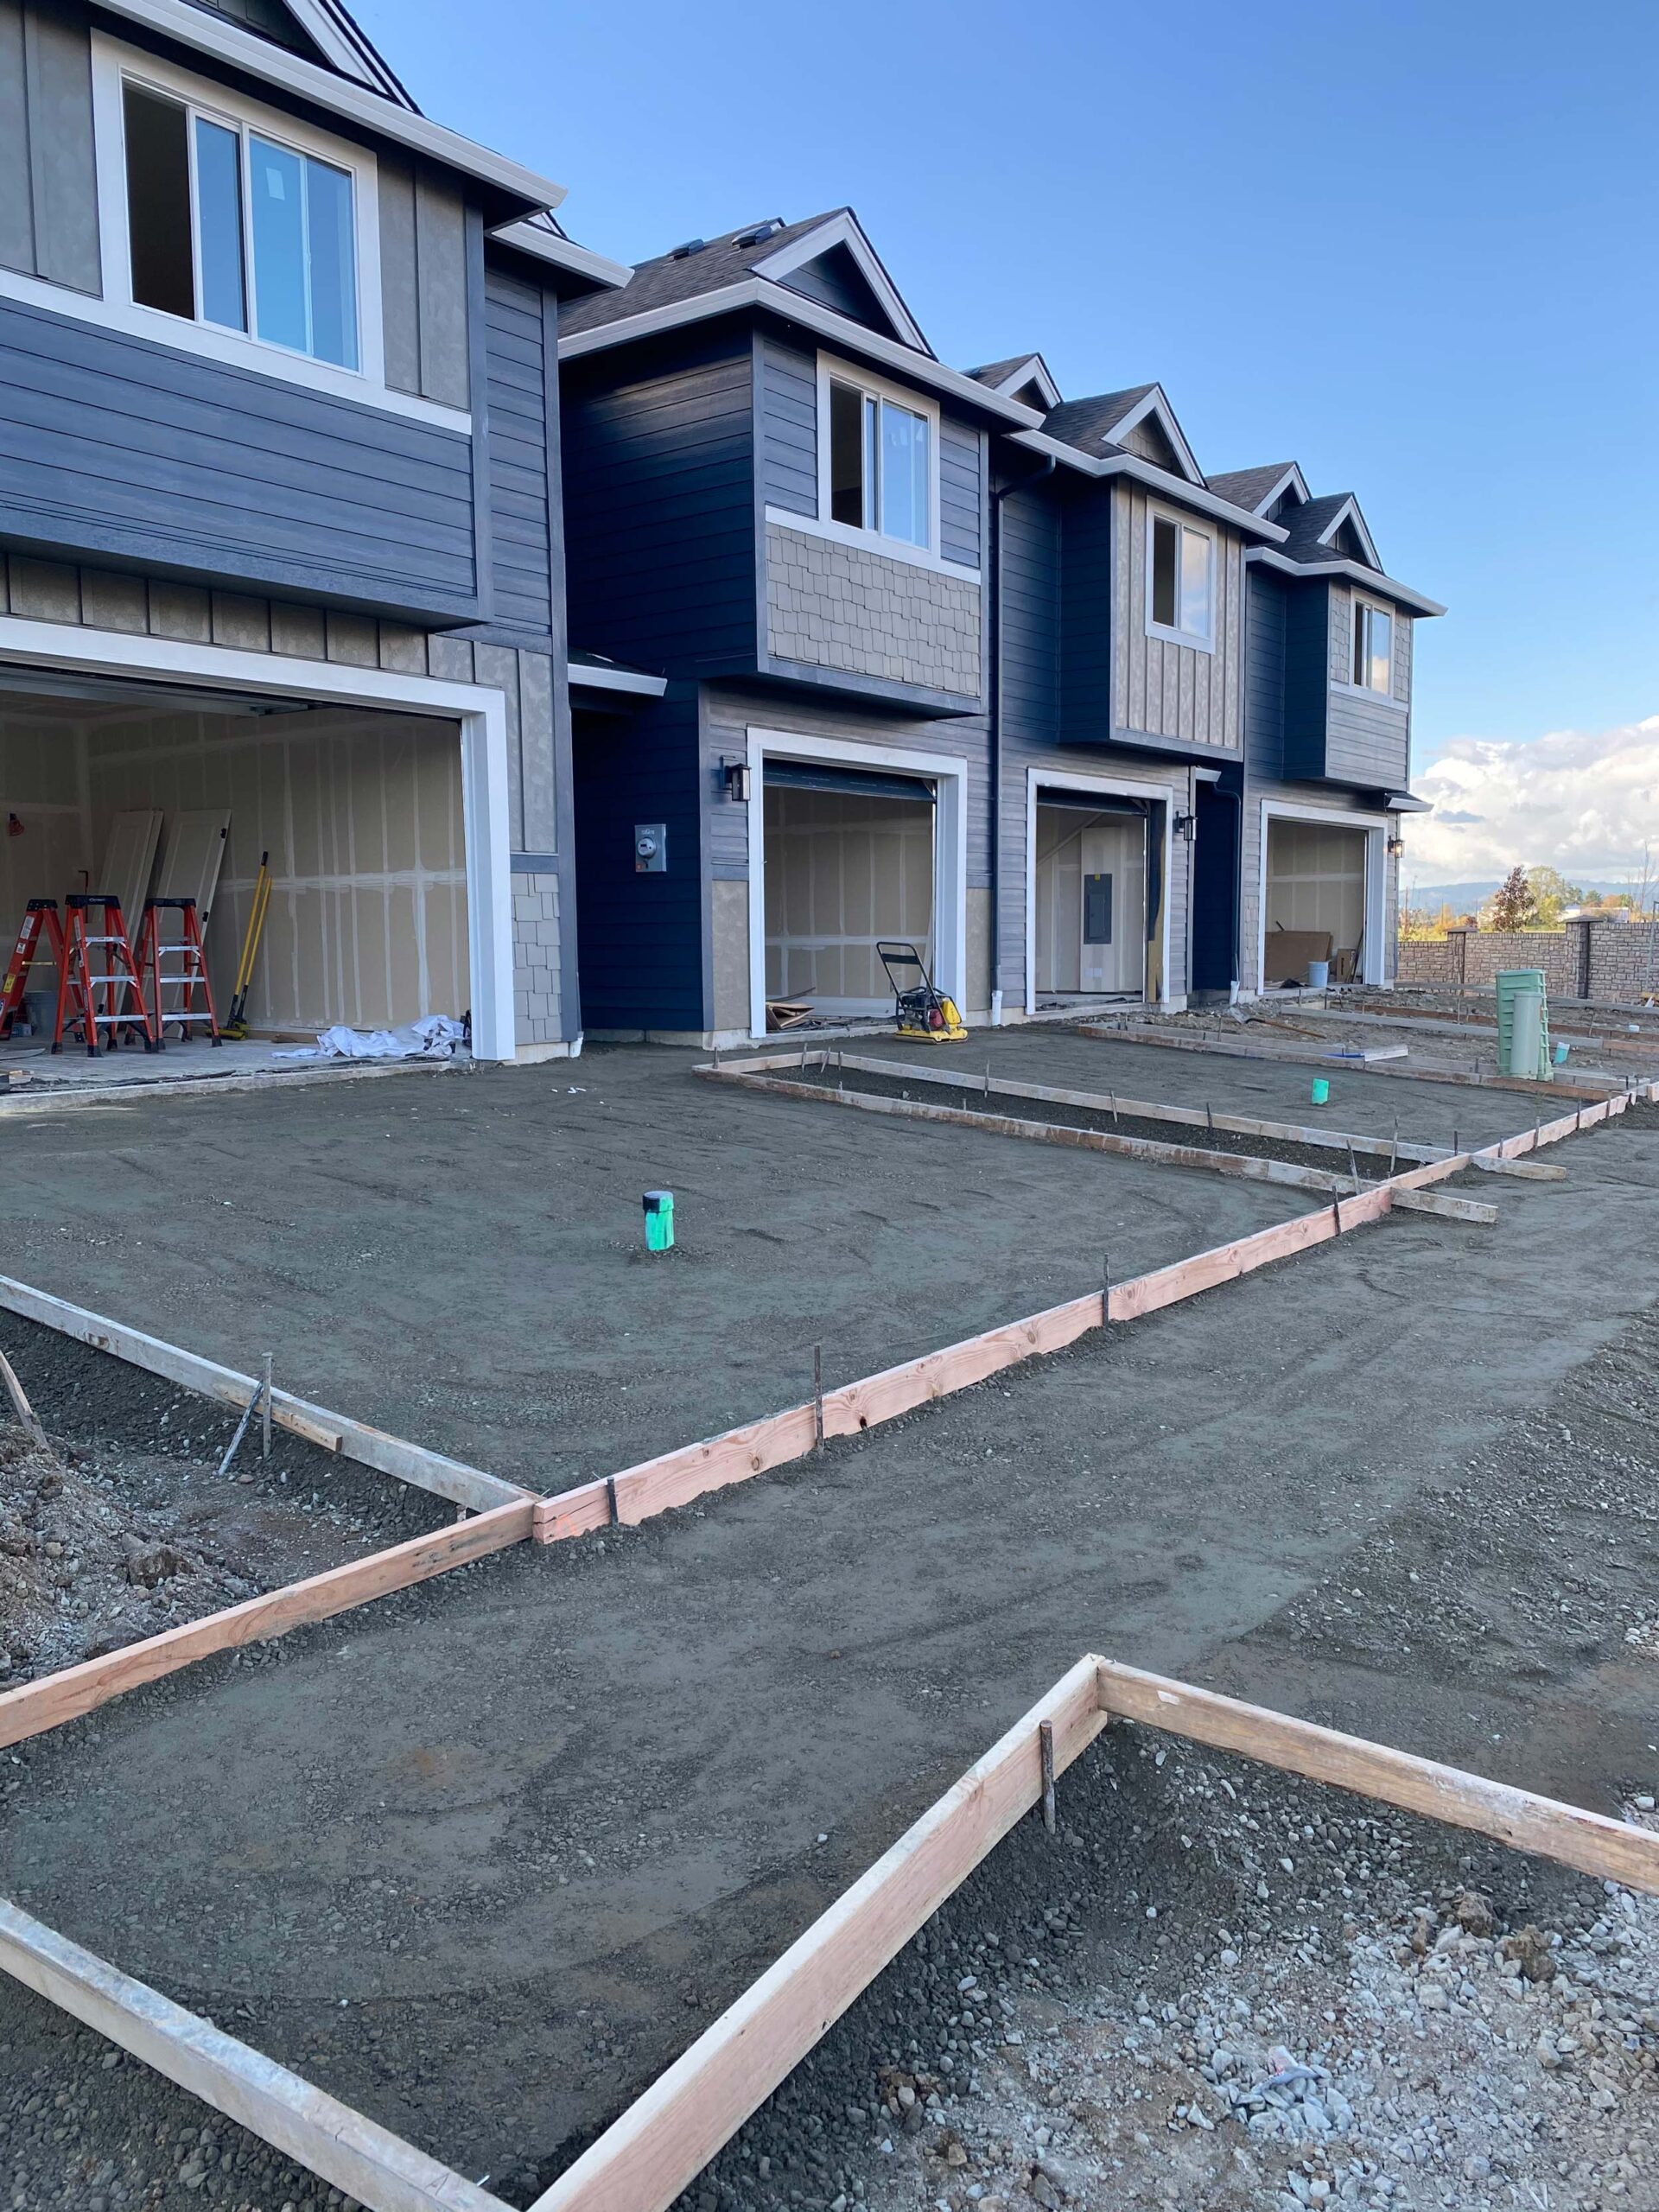 Blue and grey townhouses with concrete foundation for driveways in new construction development.